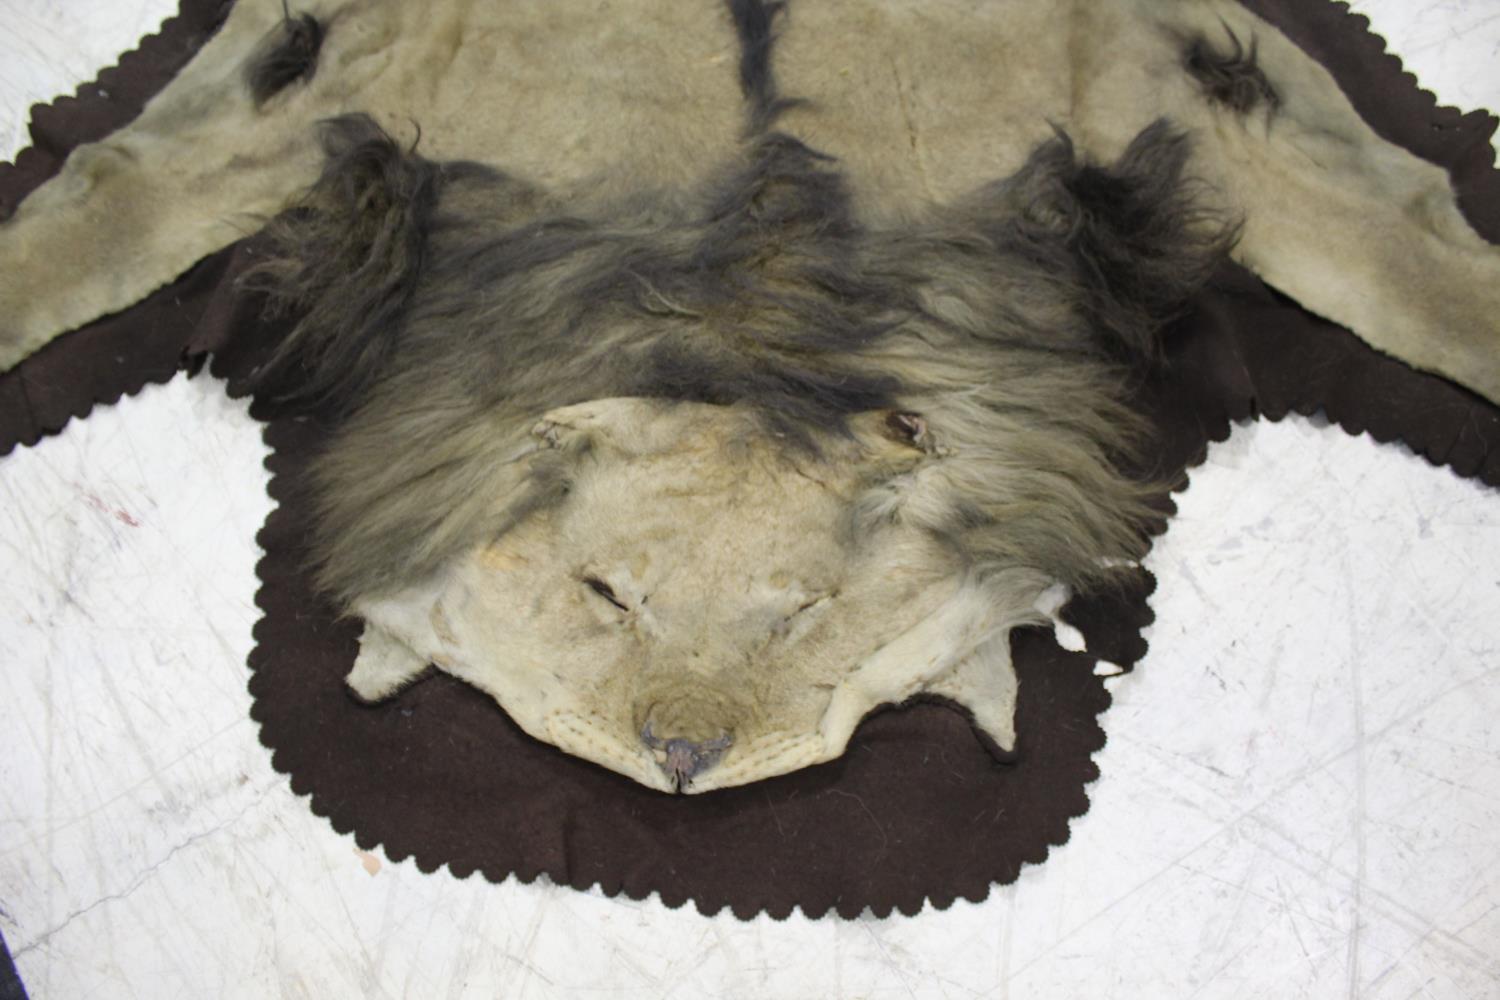 PETER SPICER & SONS - LION SKIN a full mounted flat Lion skin, mounted on a material backing. With a - Image 4 of 11